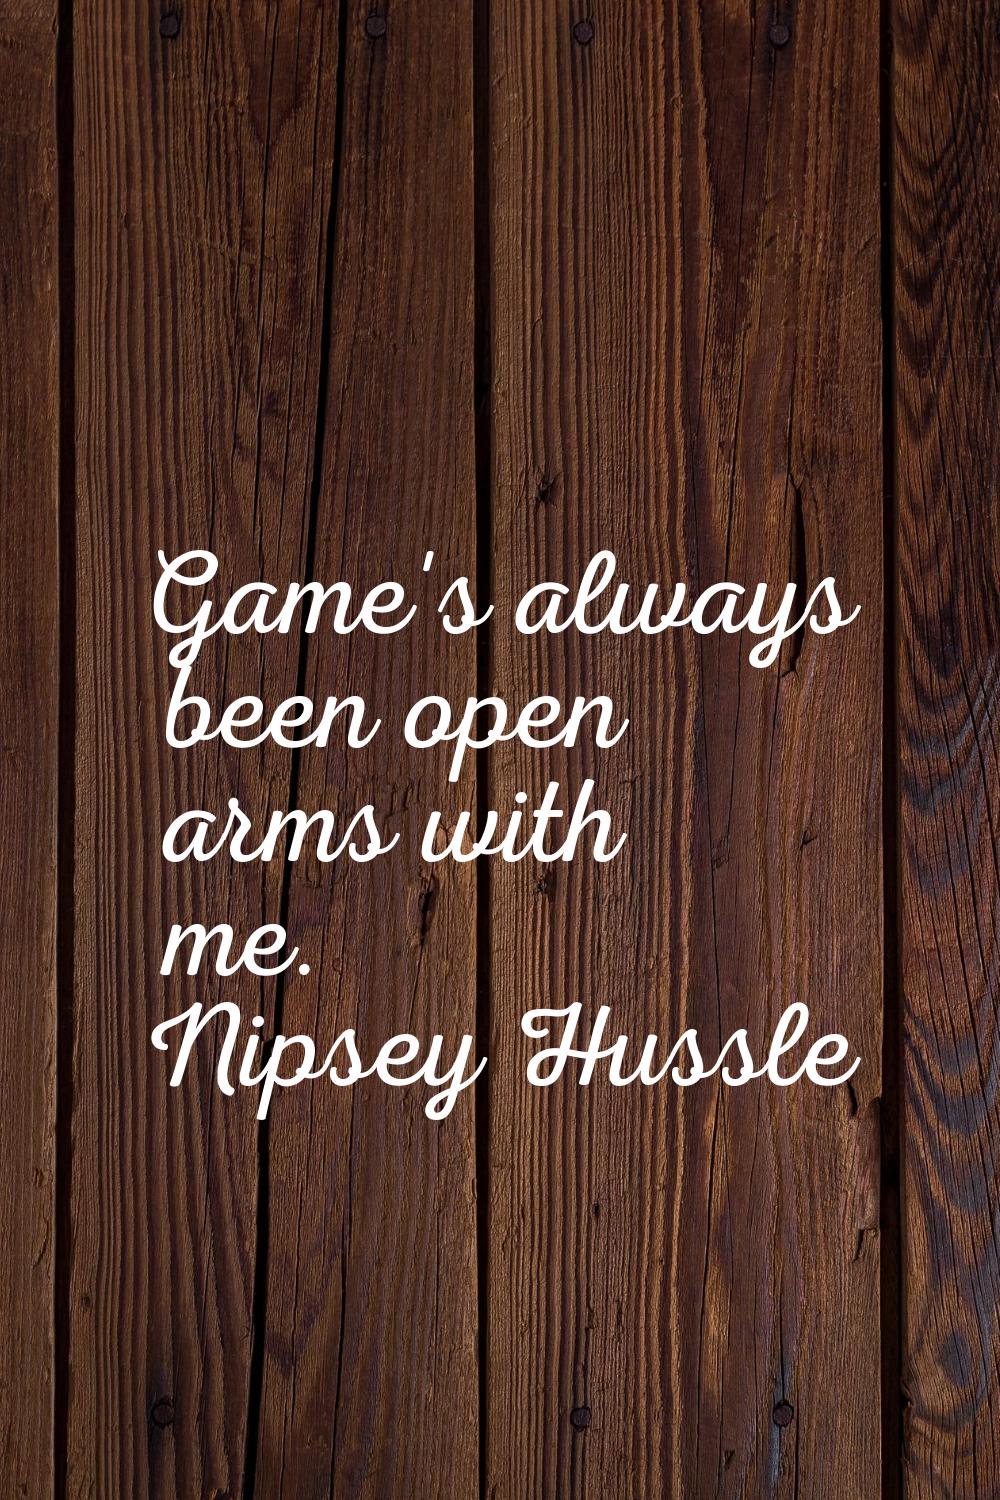 Game's always been open arms with me.